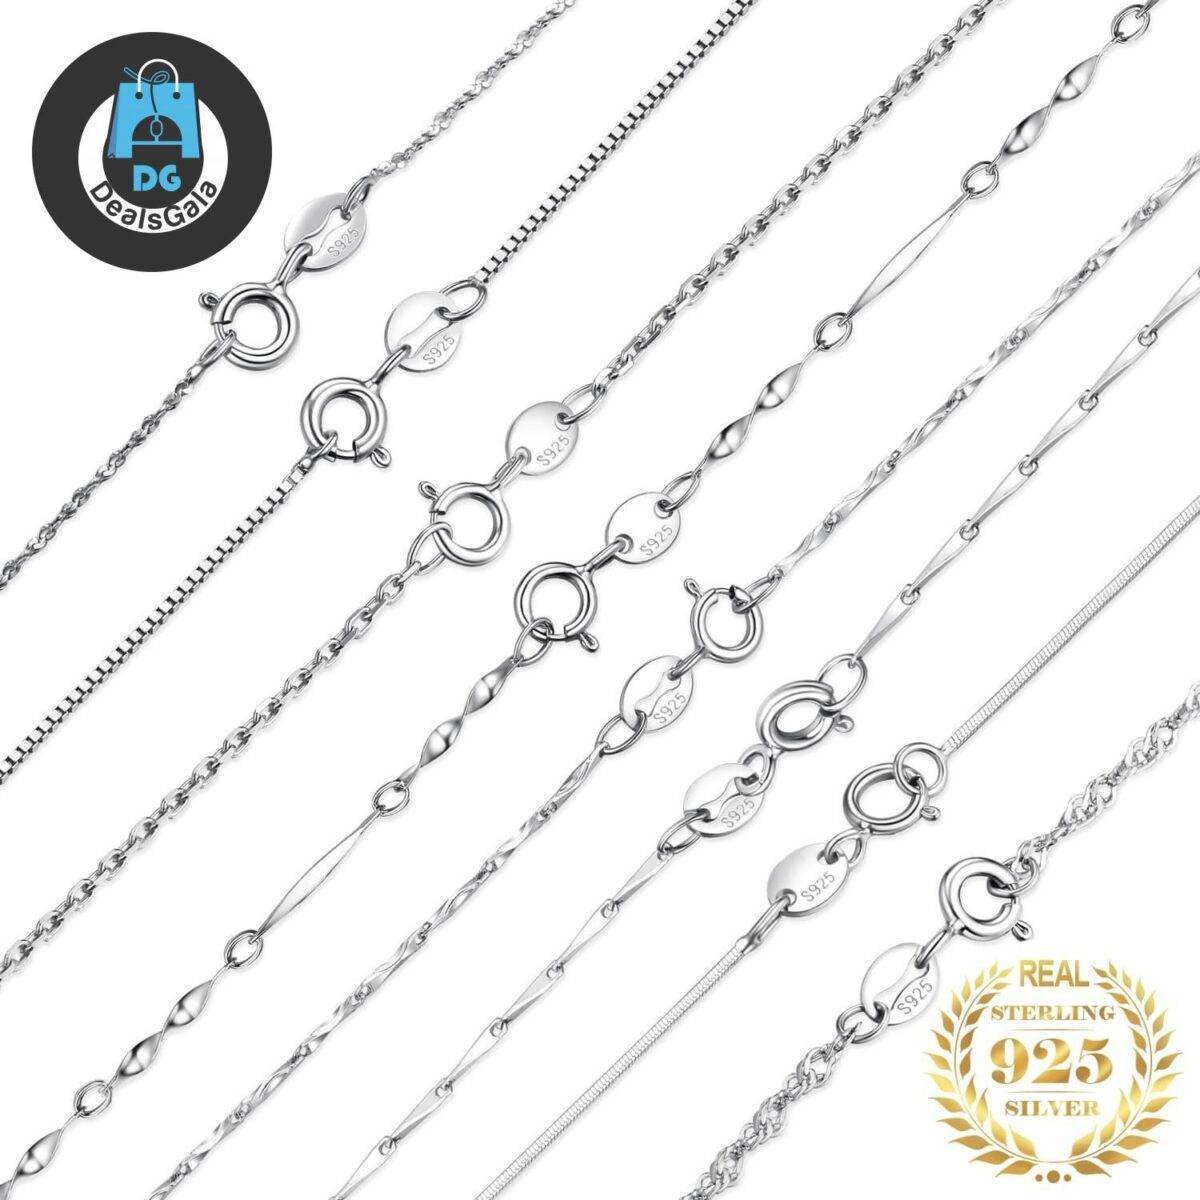 100% Genuine 925 Sterling Silver Necklace Jewelry Necklace 8703dcb1fe25ce56b571b2: BAR CHAIN 40CM|BAR CHAIN 45CM|BOX CHAIN 40CM M|BOX CHAIN 40CM S|BOX CHAIN 45CM M|BOX CHAIN 45CM S|INGOT CHAIN 40CM|INGOT CHAIN 45CM|ROPE CHAIN 40CM|ROPE CHAIN 45CM M|ROPE CHAIN 45CM S|SINGAPORE CHAIN 40CM|SINGAPORE CHAIN 45CM|SNAKE CHAIN 40CM|SNAKE CHAIN 45CM|TRACE CHAIN 40CM M|TRACE CHAIN 40CM S|TRACE CHAIN 45CM M|TRACE CHAIN 45CM S|TWISTED CHAIN 40CM|TWISTED CHAIN 45CM